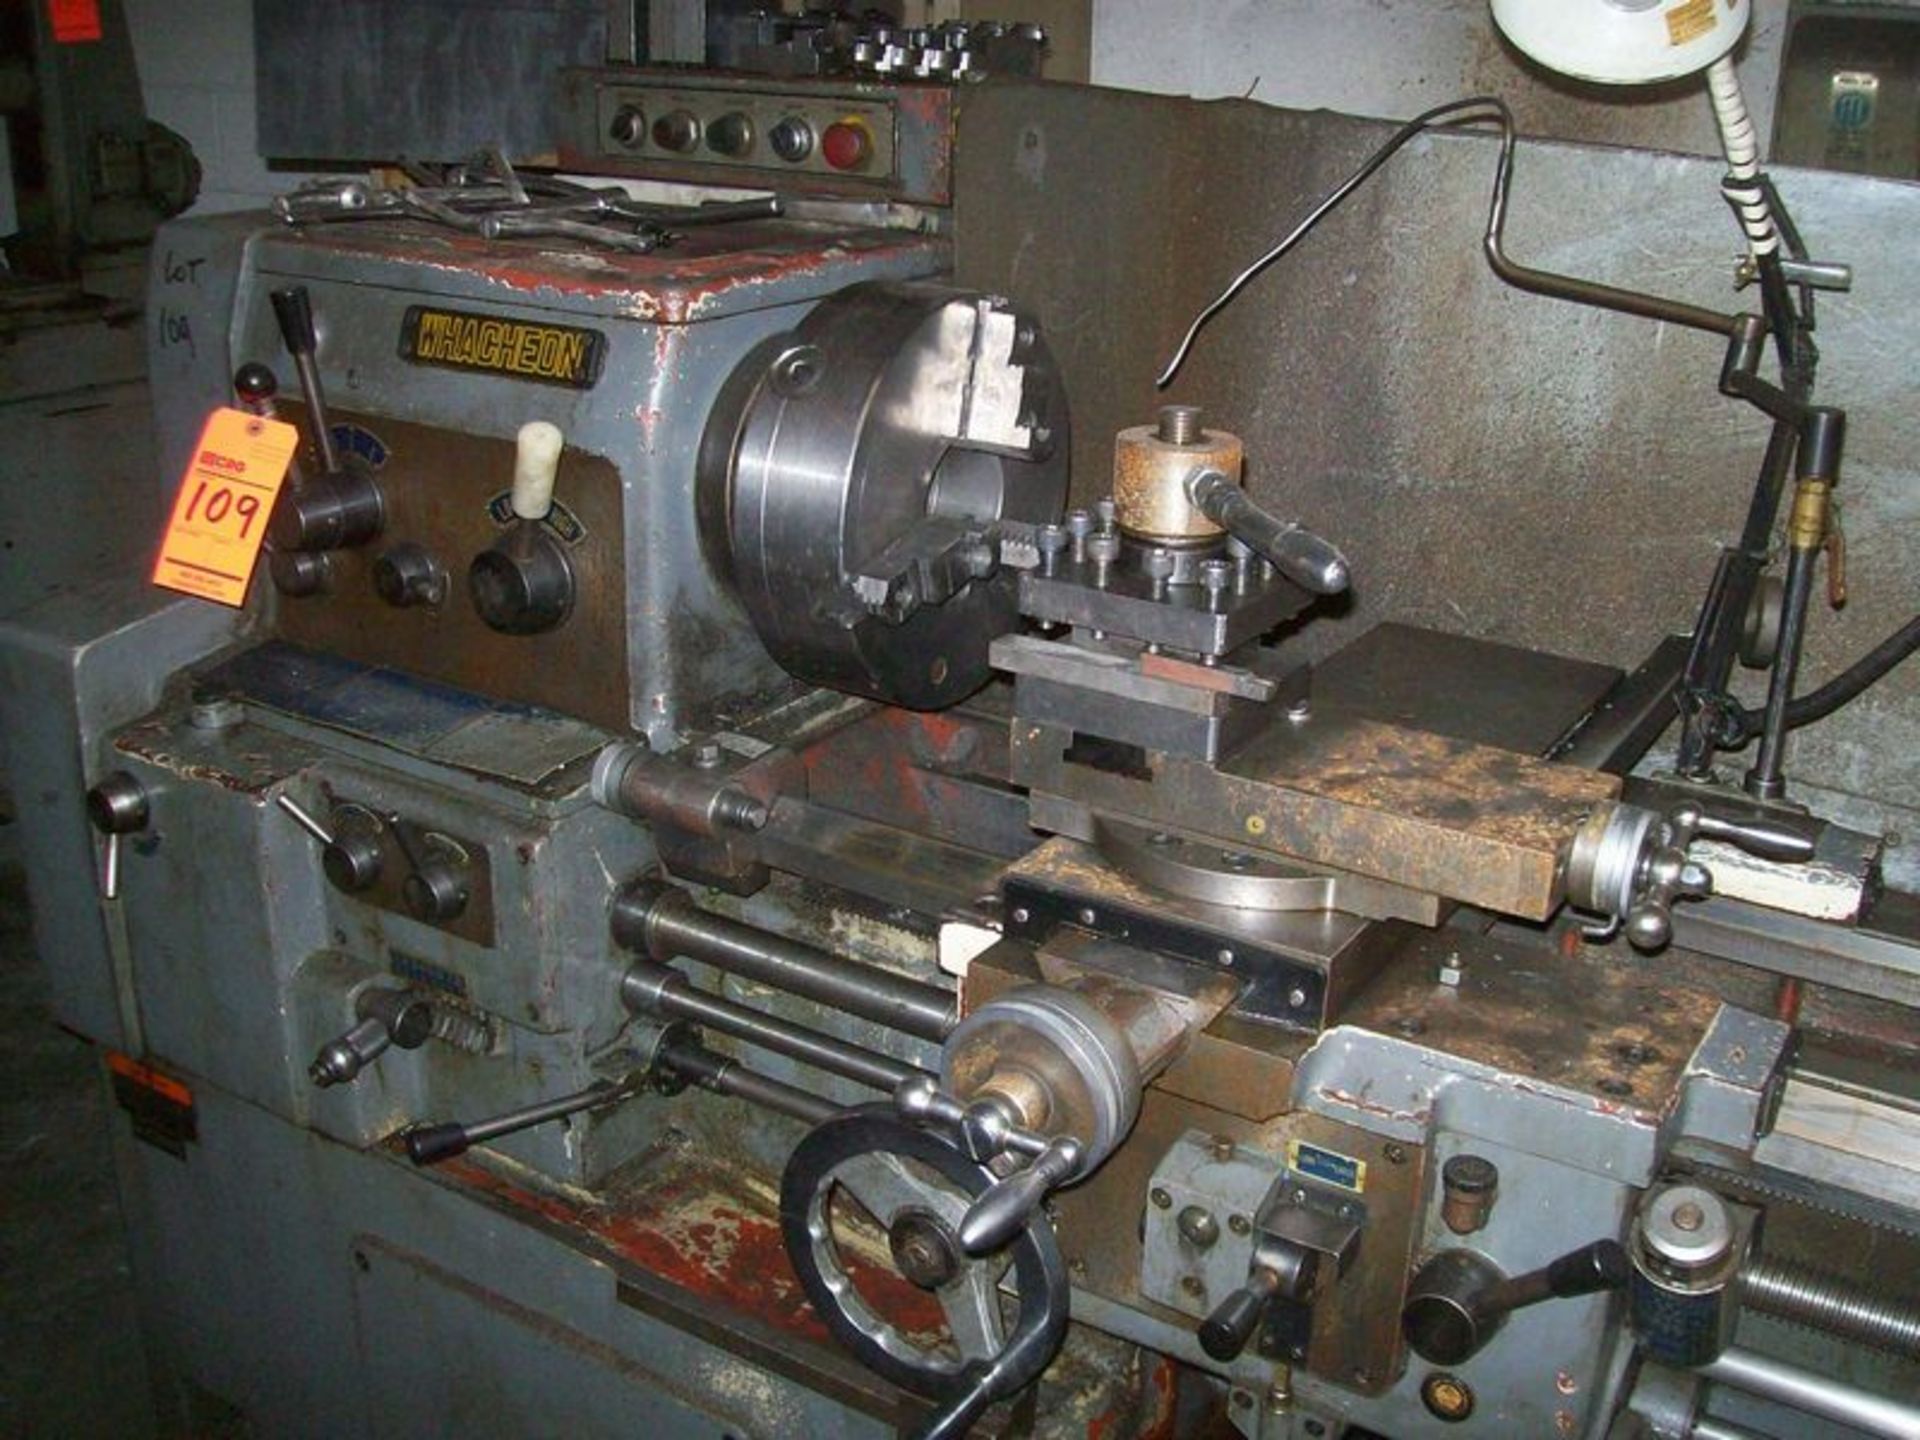 Wacheon engine lathe, M/N WL-435, S/N 8803-56, with 12", 3-jaw chuck, 18" BC, 80" bed, stead rest - Image 4 of 4